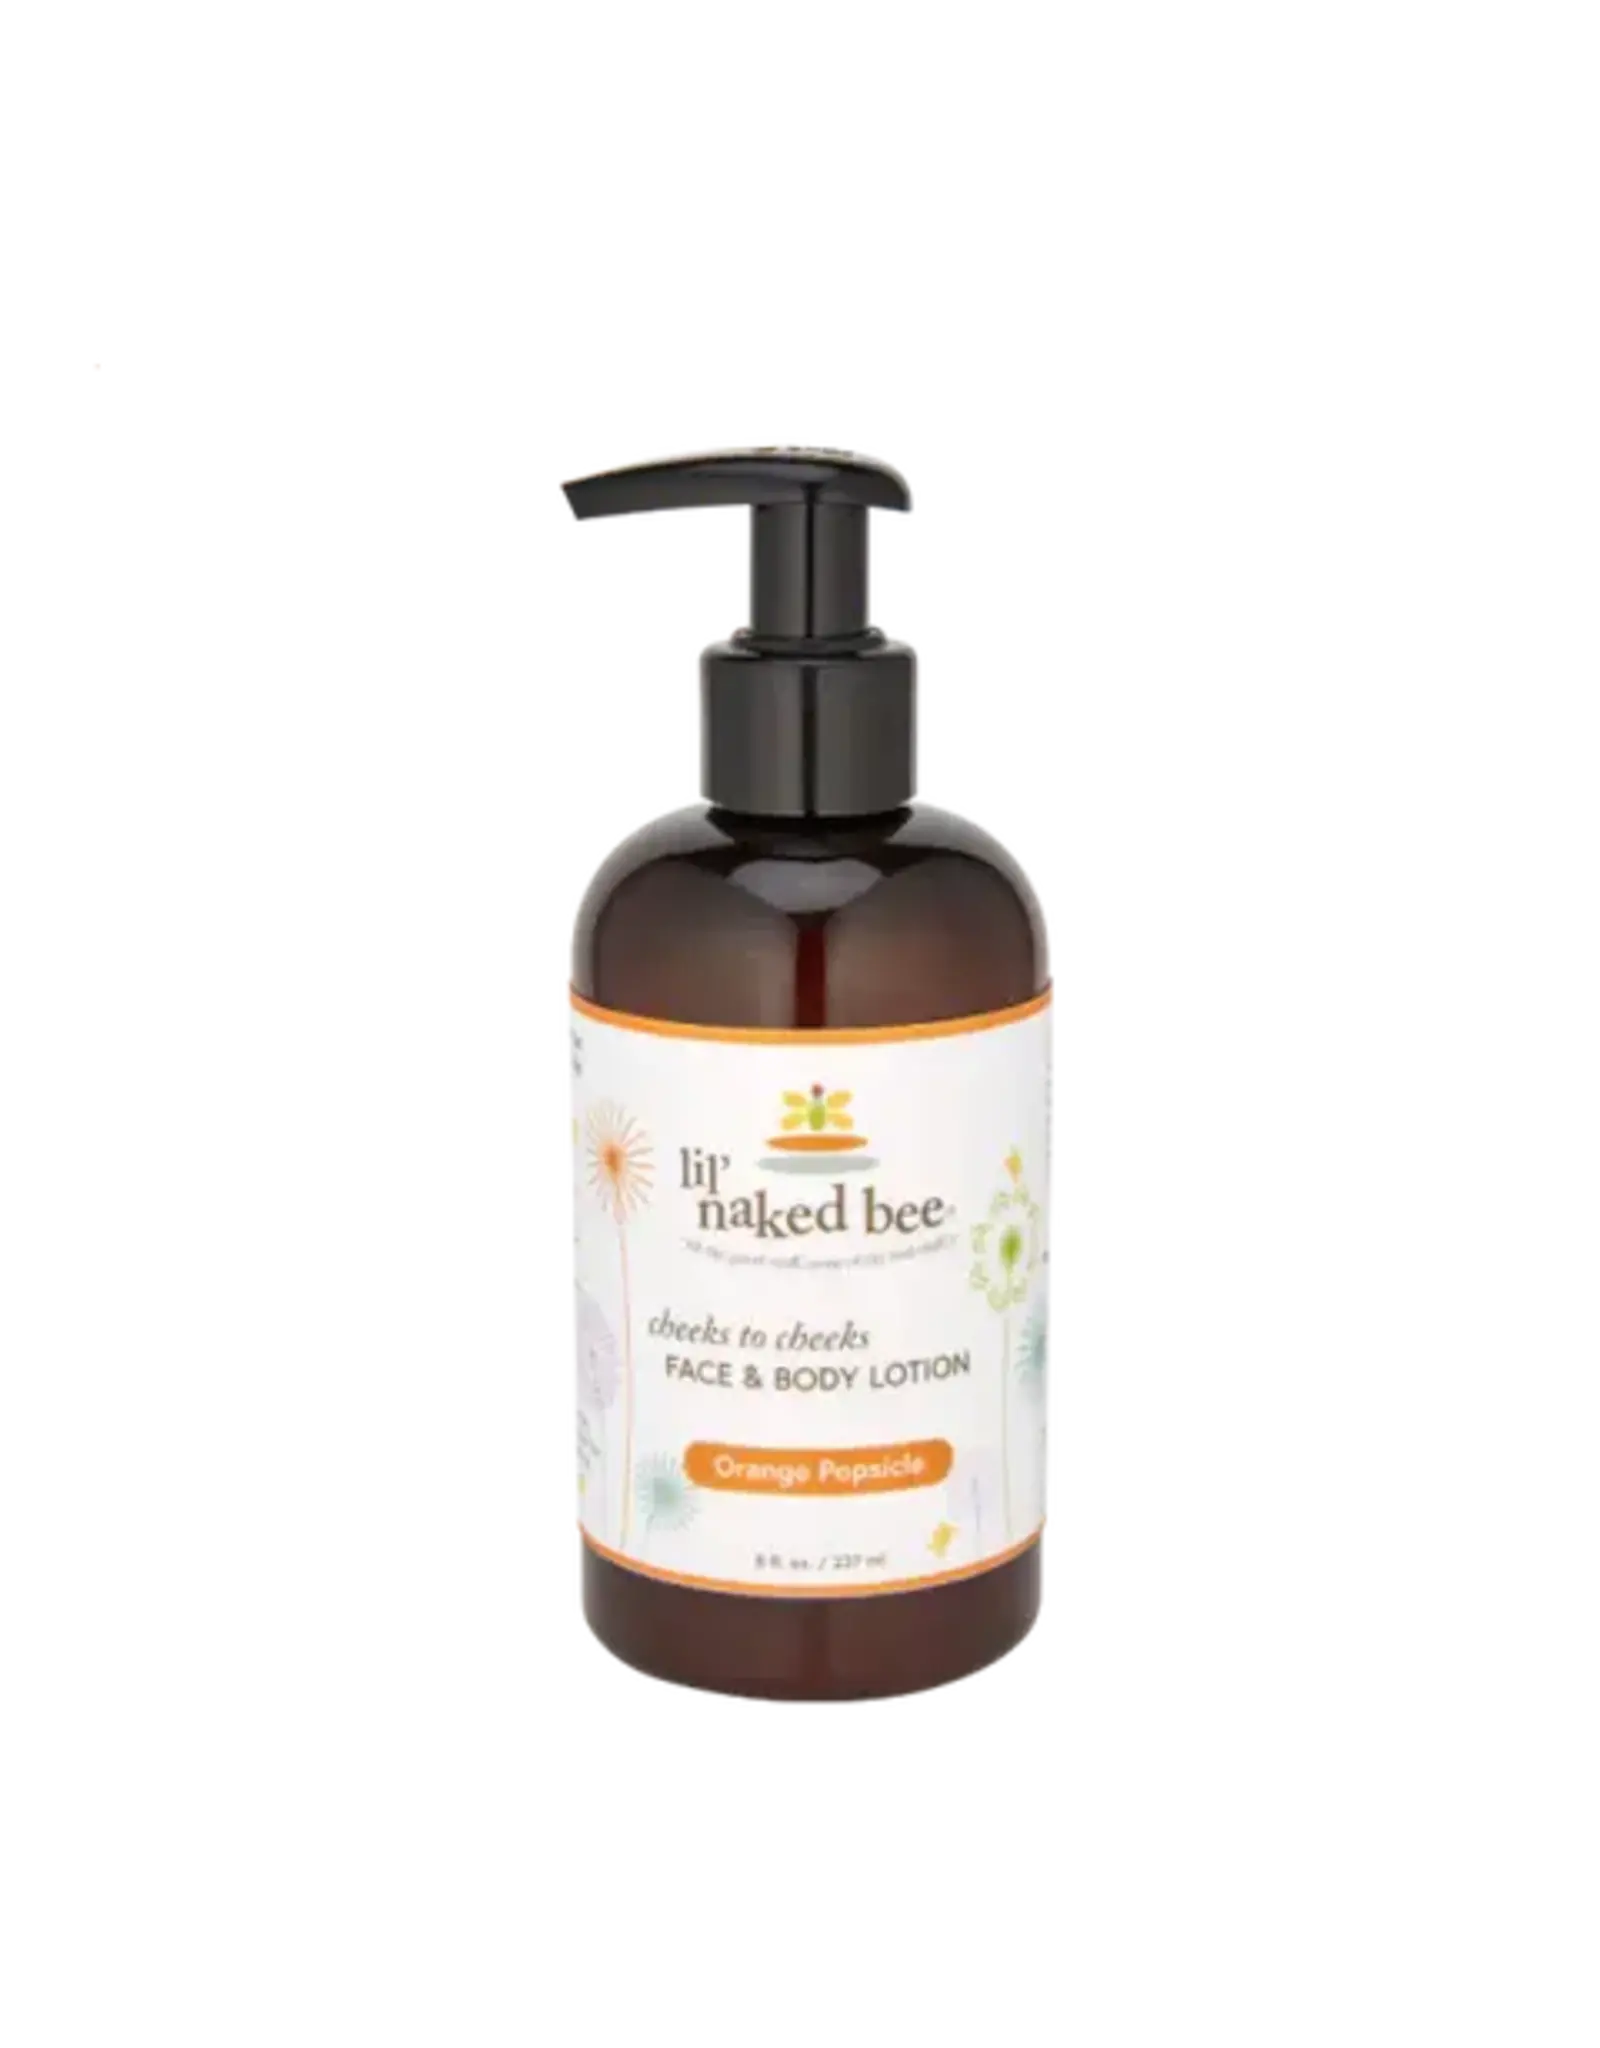 The Naked Bee Lil' Naked Bee - Cheeks to Cheeks Face & Body Lotion, 8 oz. Orange Popsicle